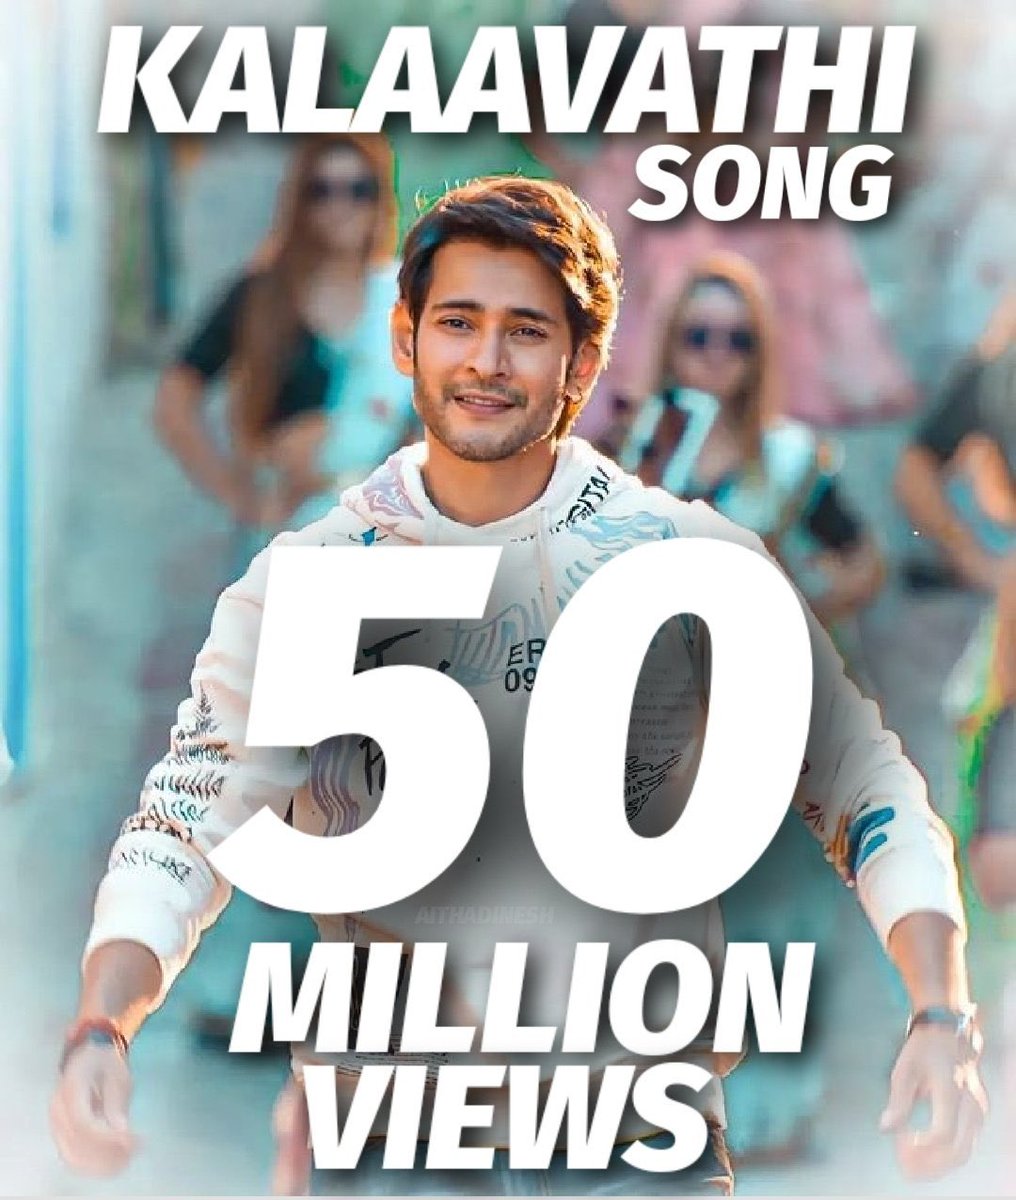 SUPER STAR @urstrulyMahesh’s #SVPFirstSingle #KalaavathiHits50MViews 

The Song Was Instant Chartbuster When It Was Released..!
Milestone Achieved In Just 13Days..!

@MusicThaman Musical @sidsriram Vocals And @ananthasriram Lyrics Will Take You To Other Trance

#SarkaruVaariPaata